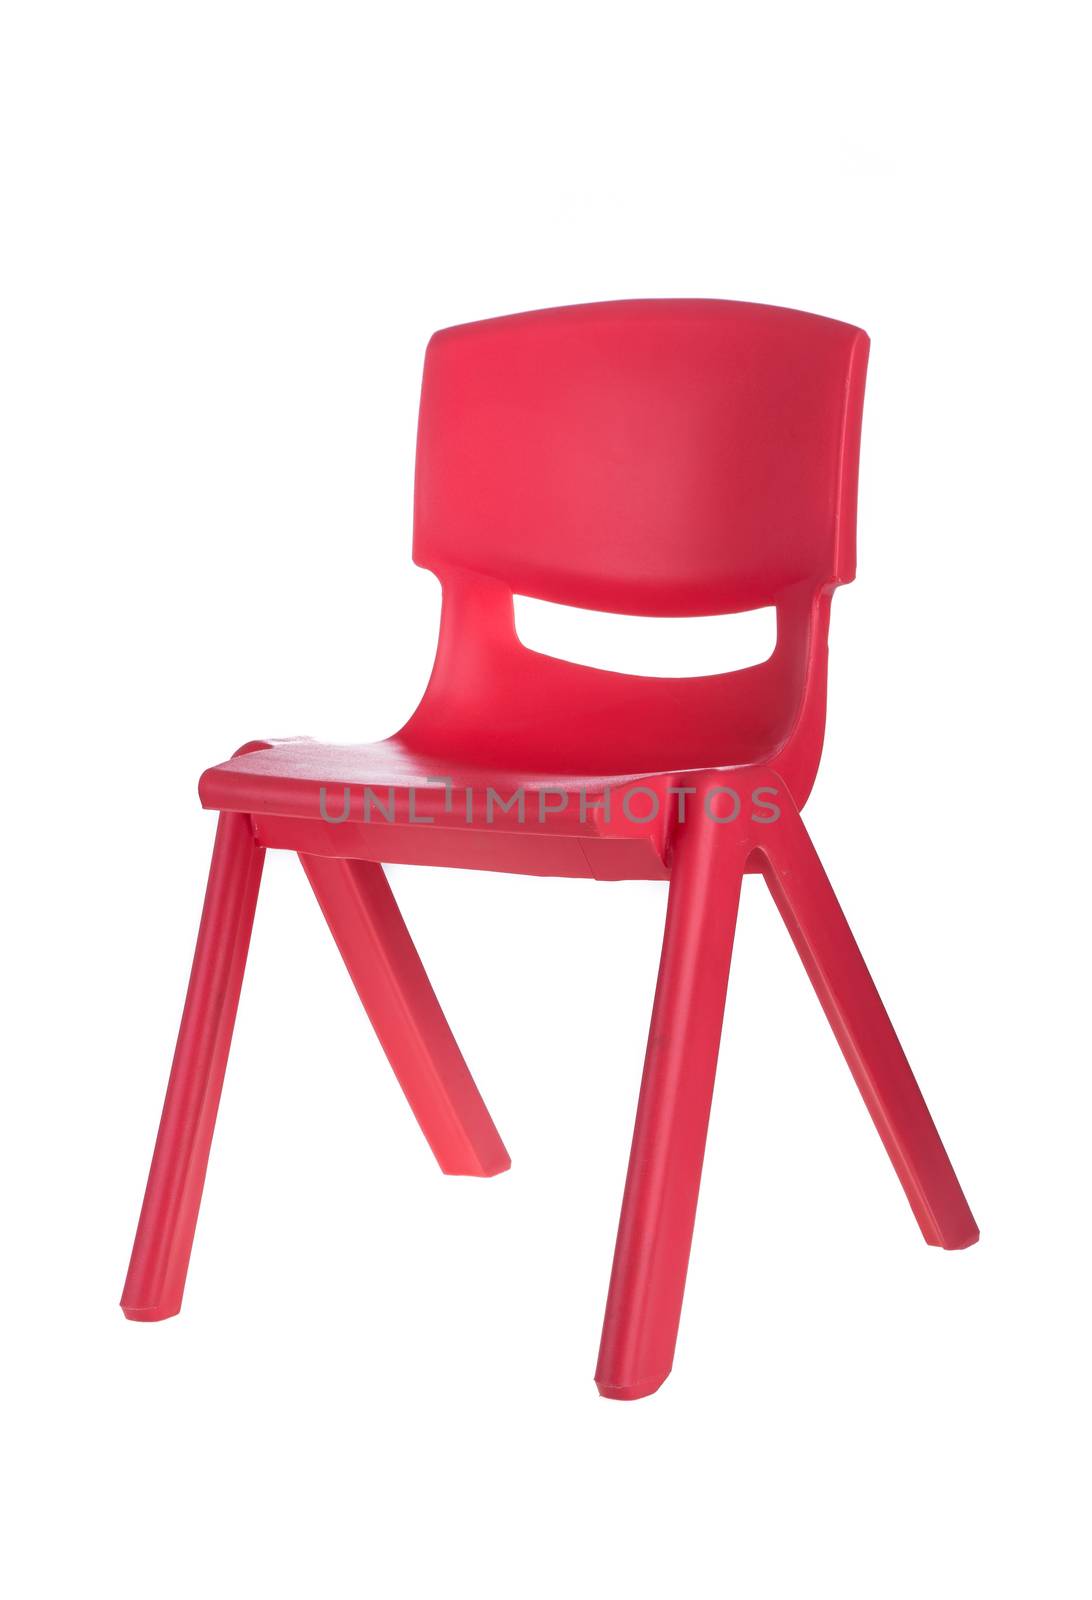 red plastic chairs by tehcheesiong